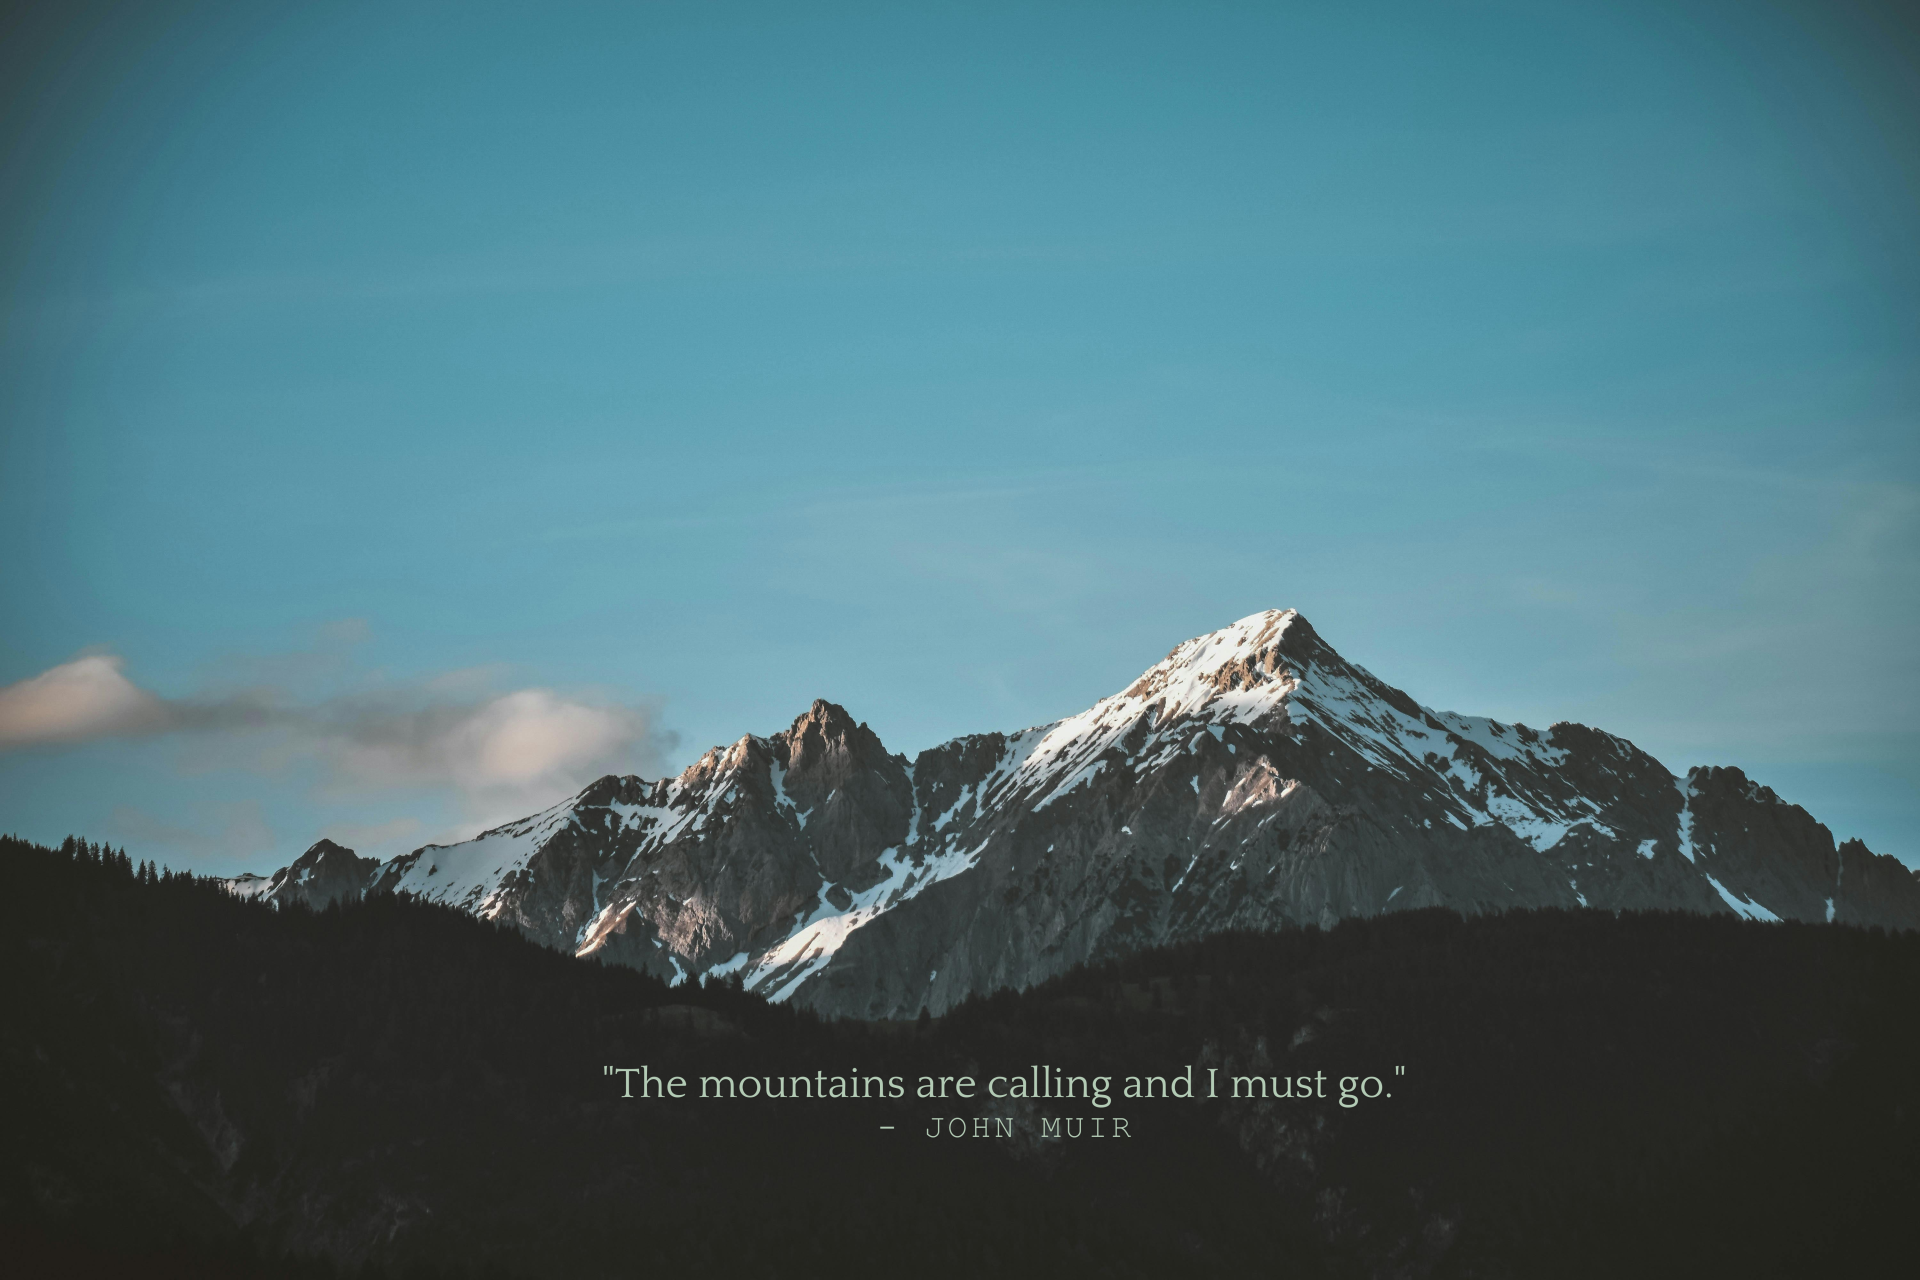 The-mountains-are-calling-and-I-must-go.-John-Muir